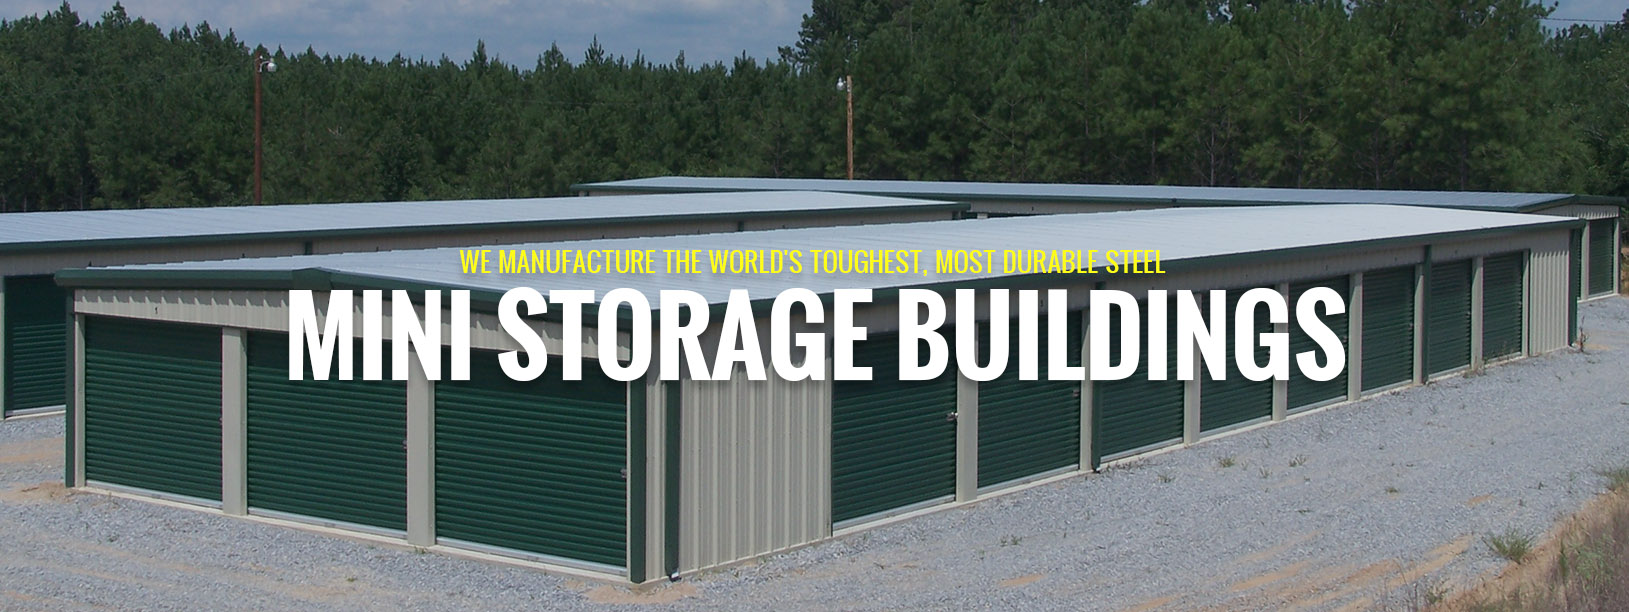 Mini Storage and Self Storage metal building kits. Let us help you start or expand your storage business with buildings that come with a 50 year warranty!